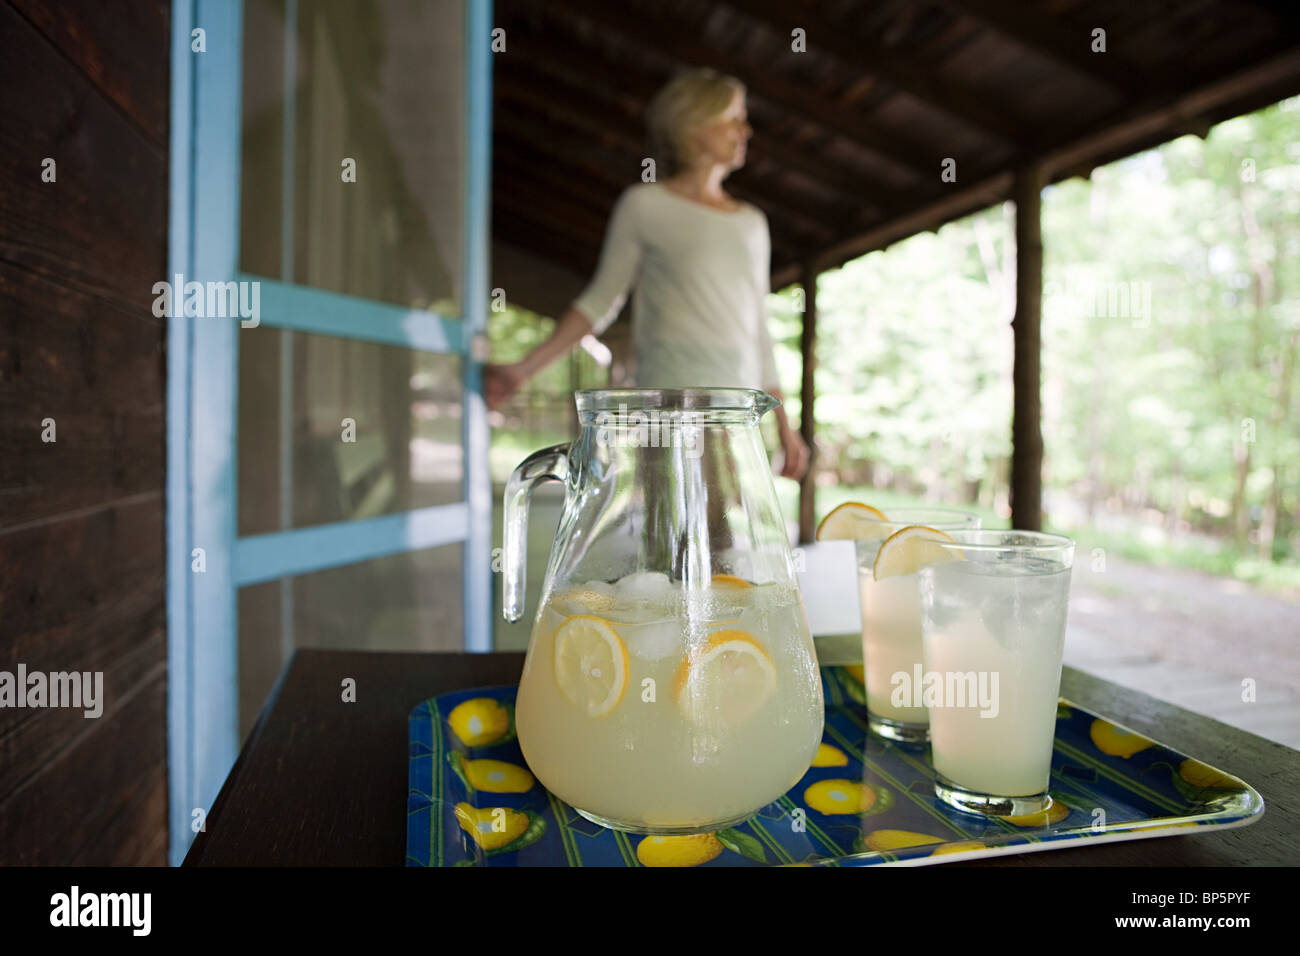 Tray of lemonade, woman in background Stock Photo